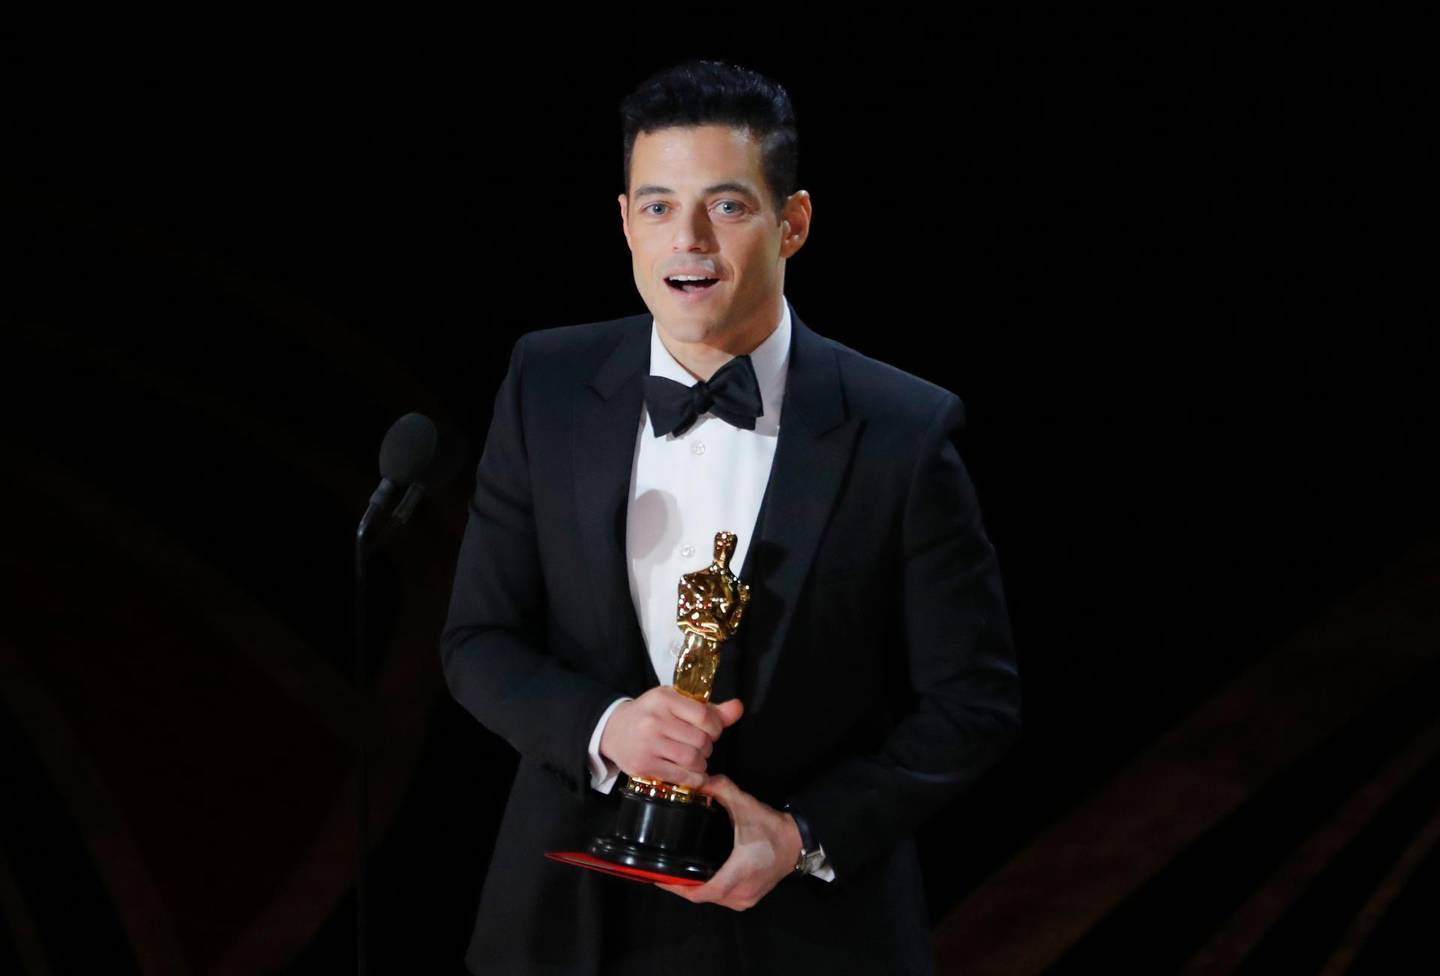 91st Academy Awards - Oscars Show - Hollywood, Los Angeles, California, U.S., February 24, 2019. Rami Malek reacts while holding his Oscar after accepting the Best Actor award for his role in "Bohemian Rhapsody". REUTERS/Mike Blake